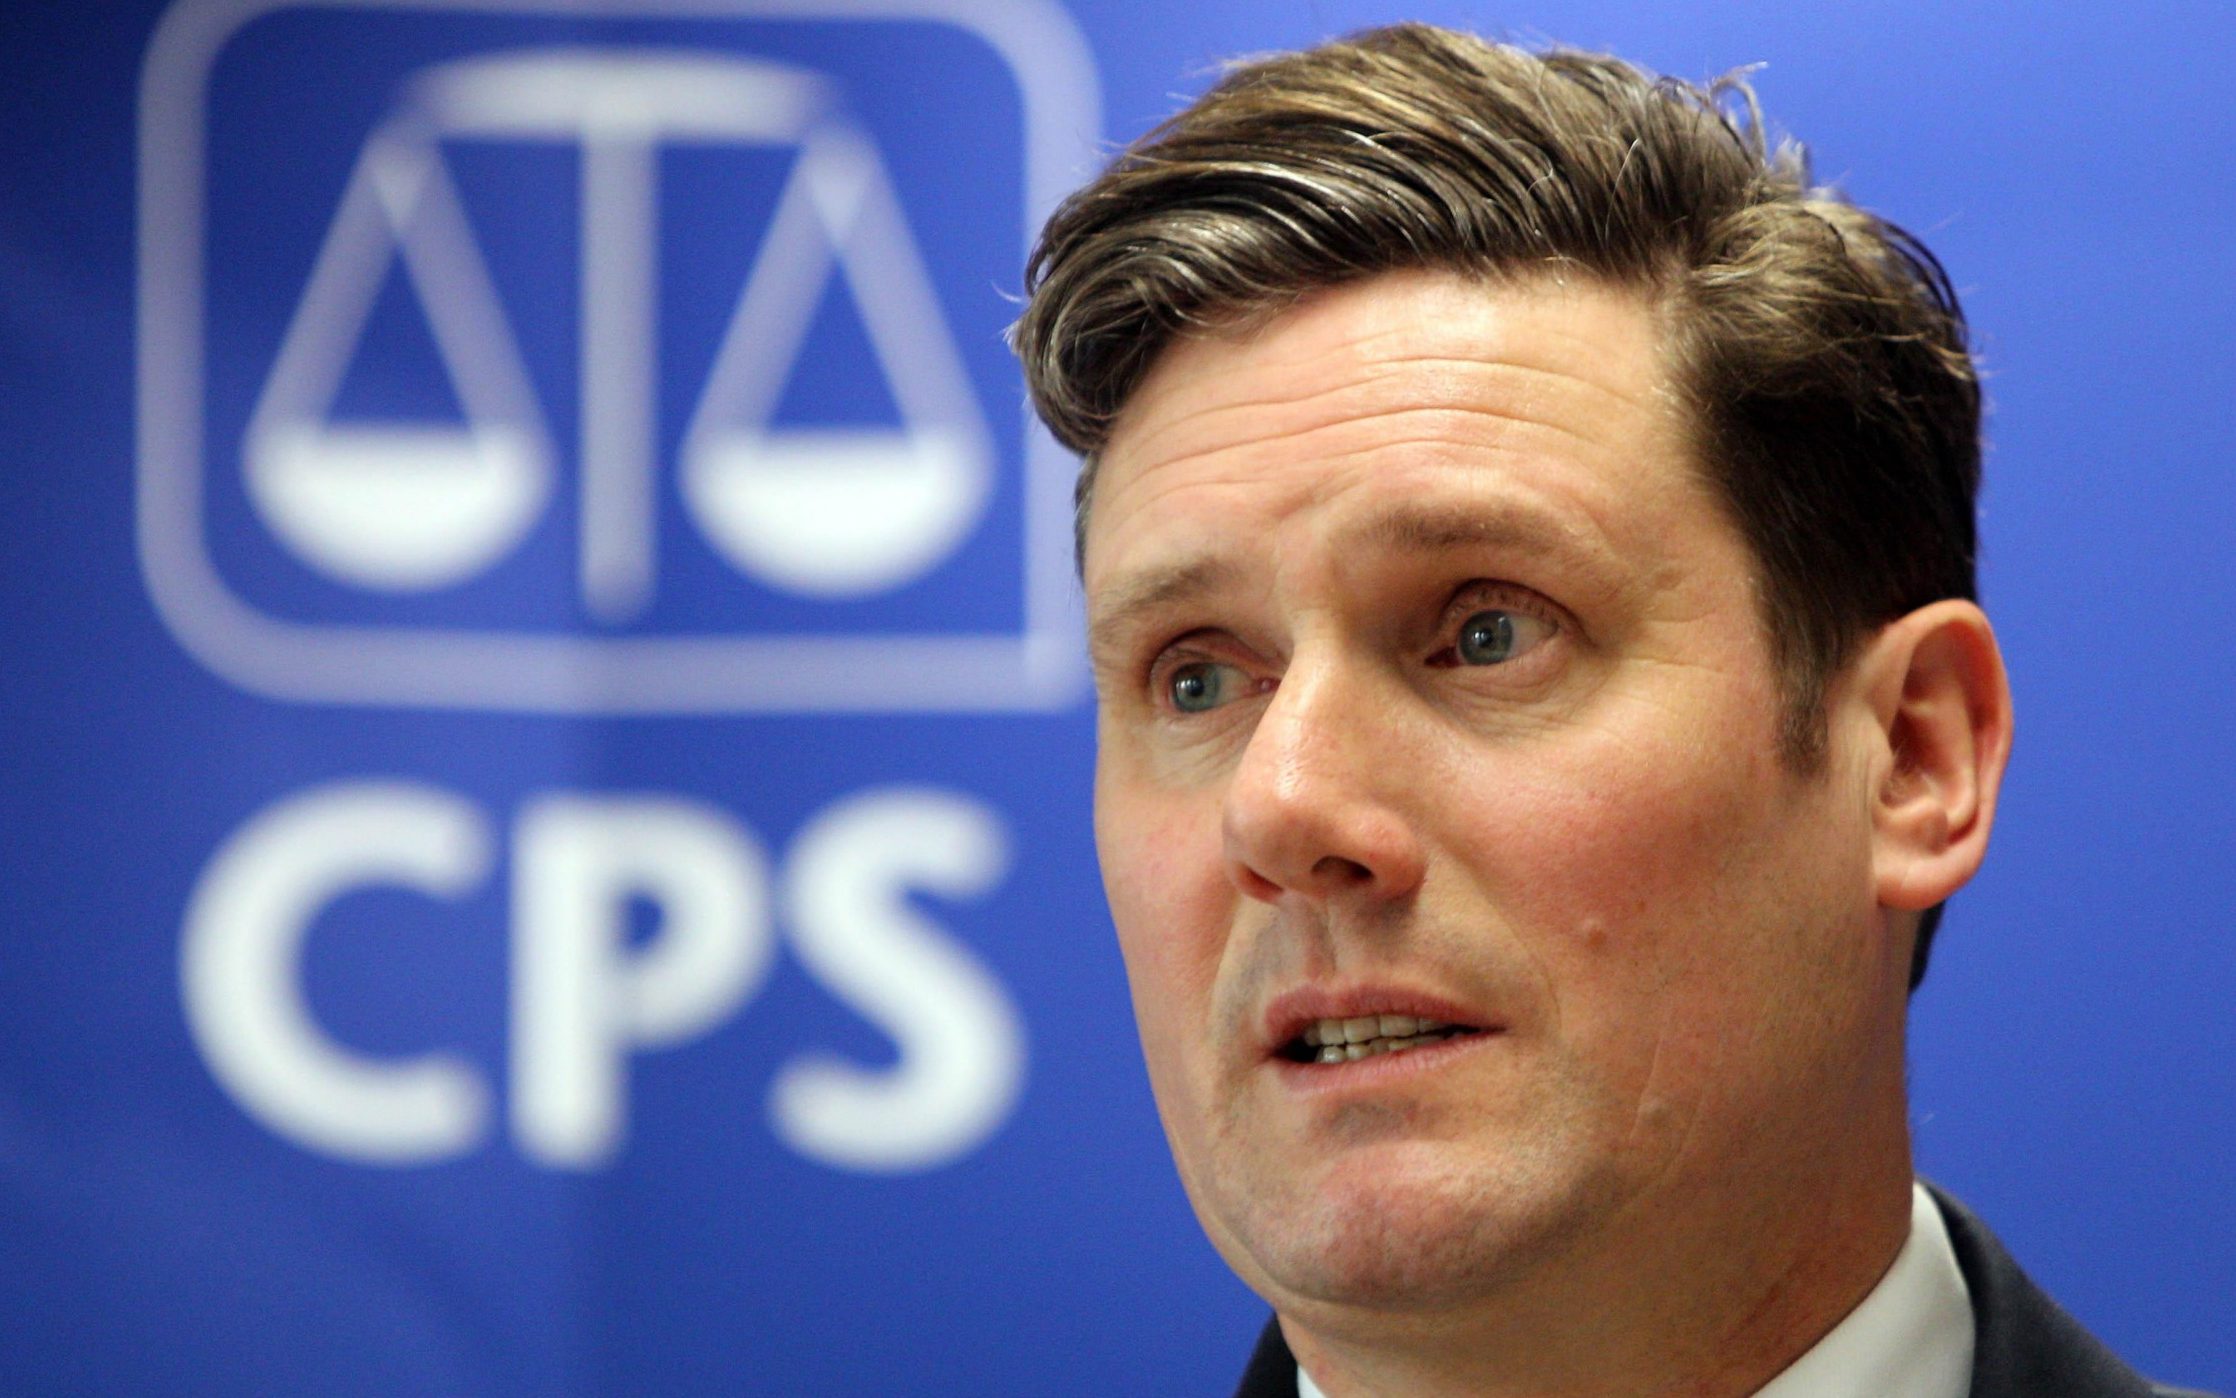 cps involved in up to 99 post office convictions, leaked letter shows